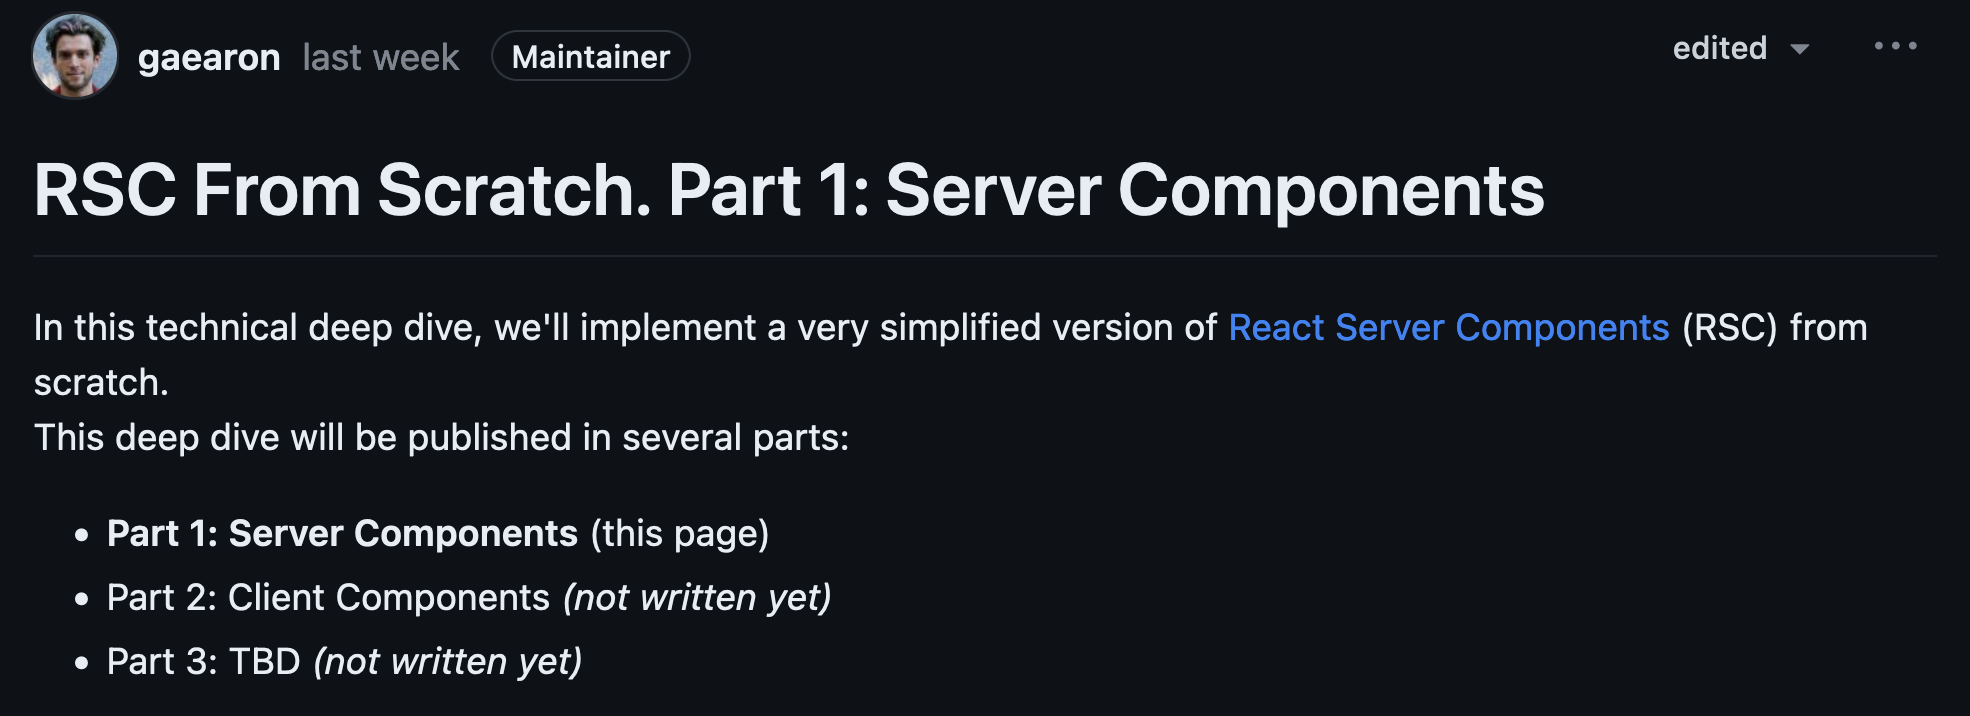 In this technical deep dive, we'll implement a very simplified version of React Server Components (RSC) from scratch. This deep dive will be published in several parts: Part 1: Server Components (this page) Part 2: Client Components (not written yet) Part 3: TBD (not written yet)